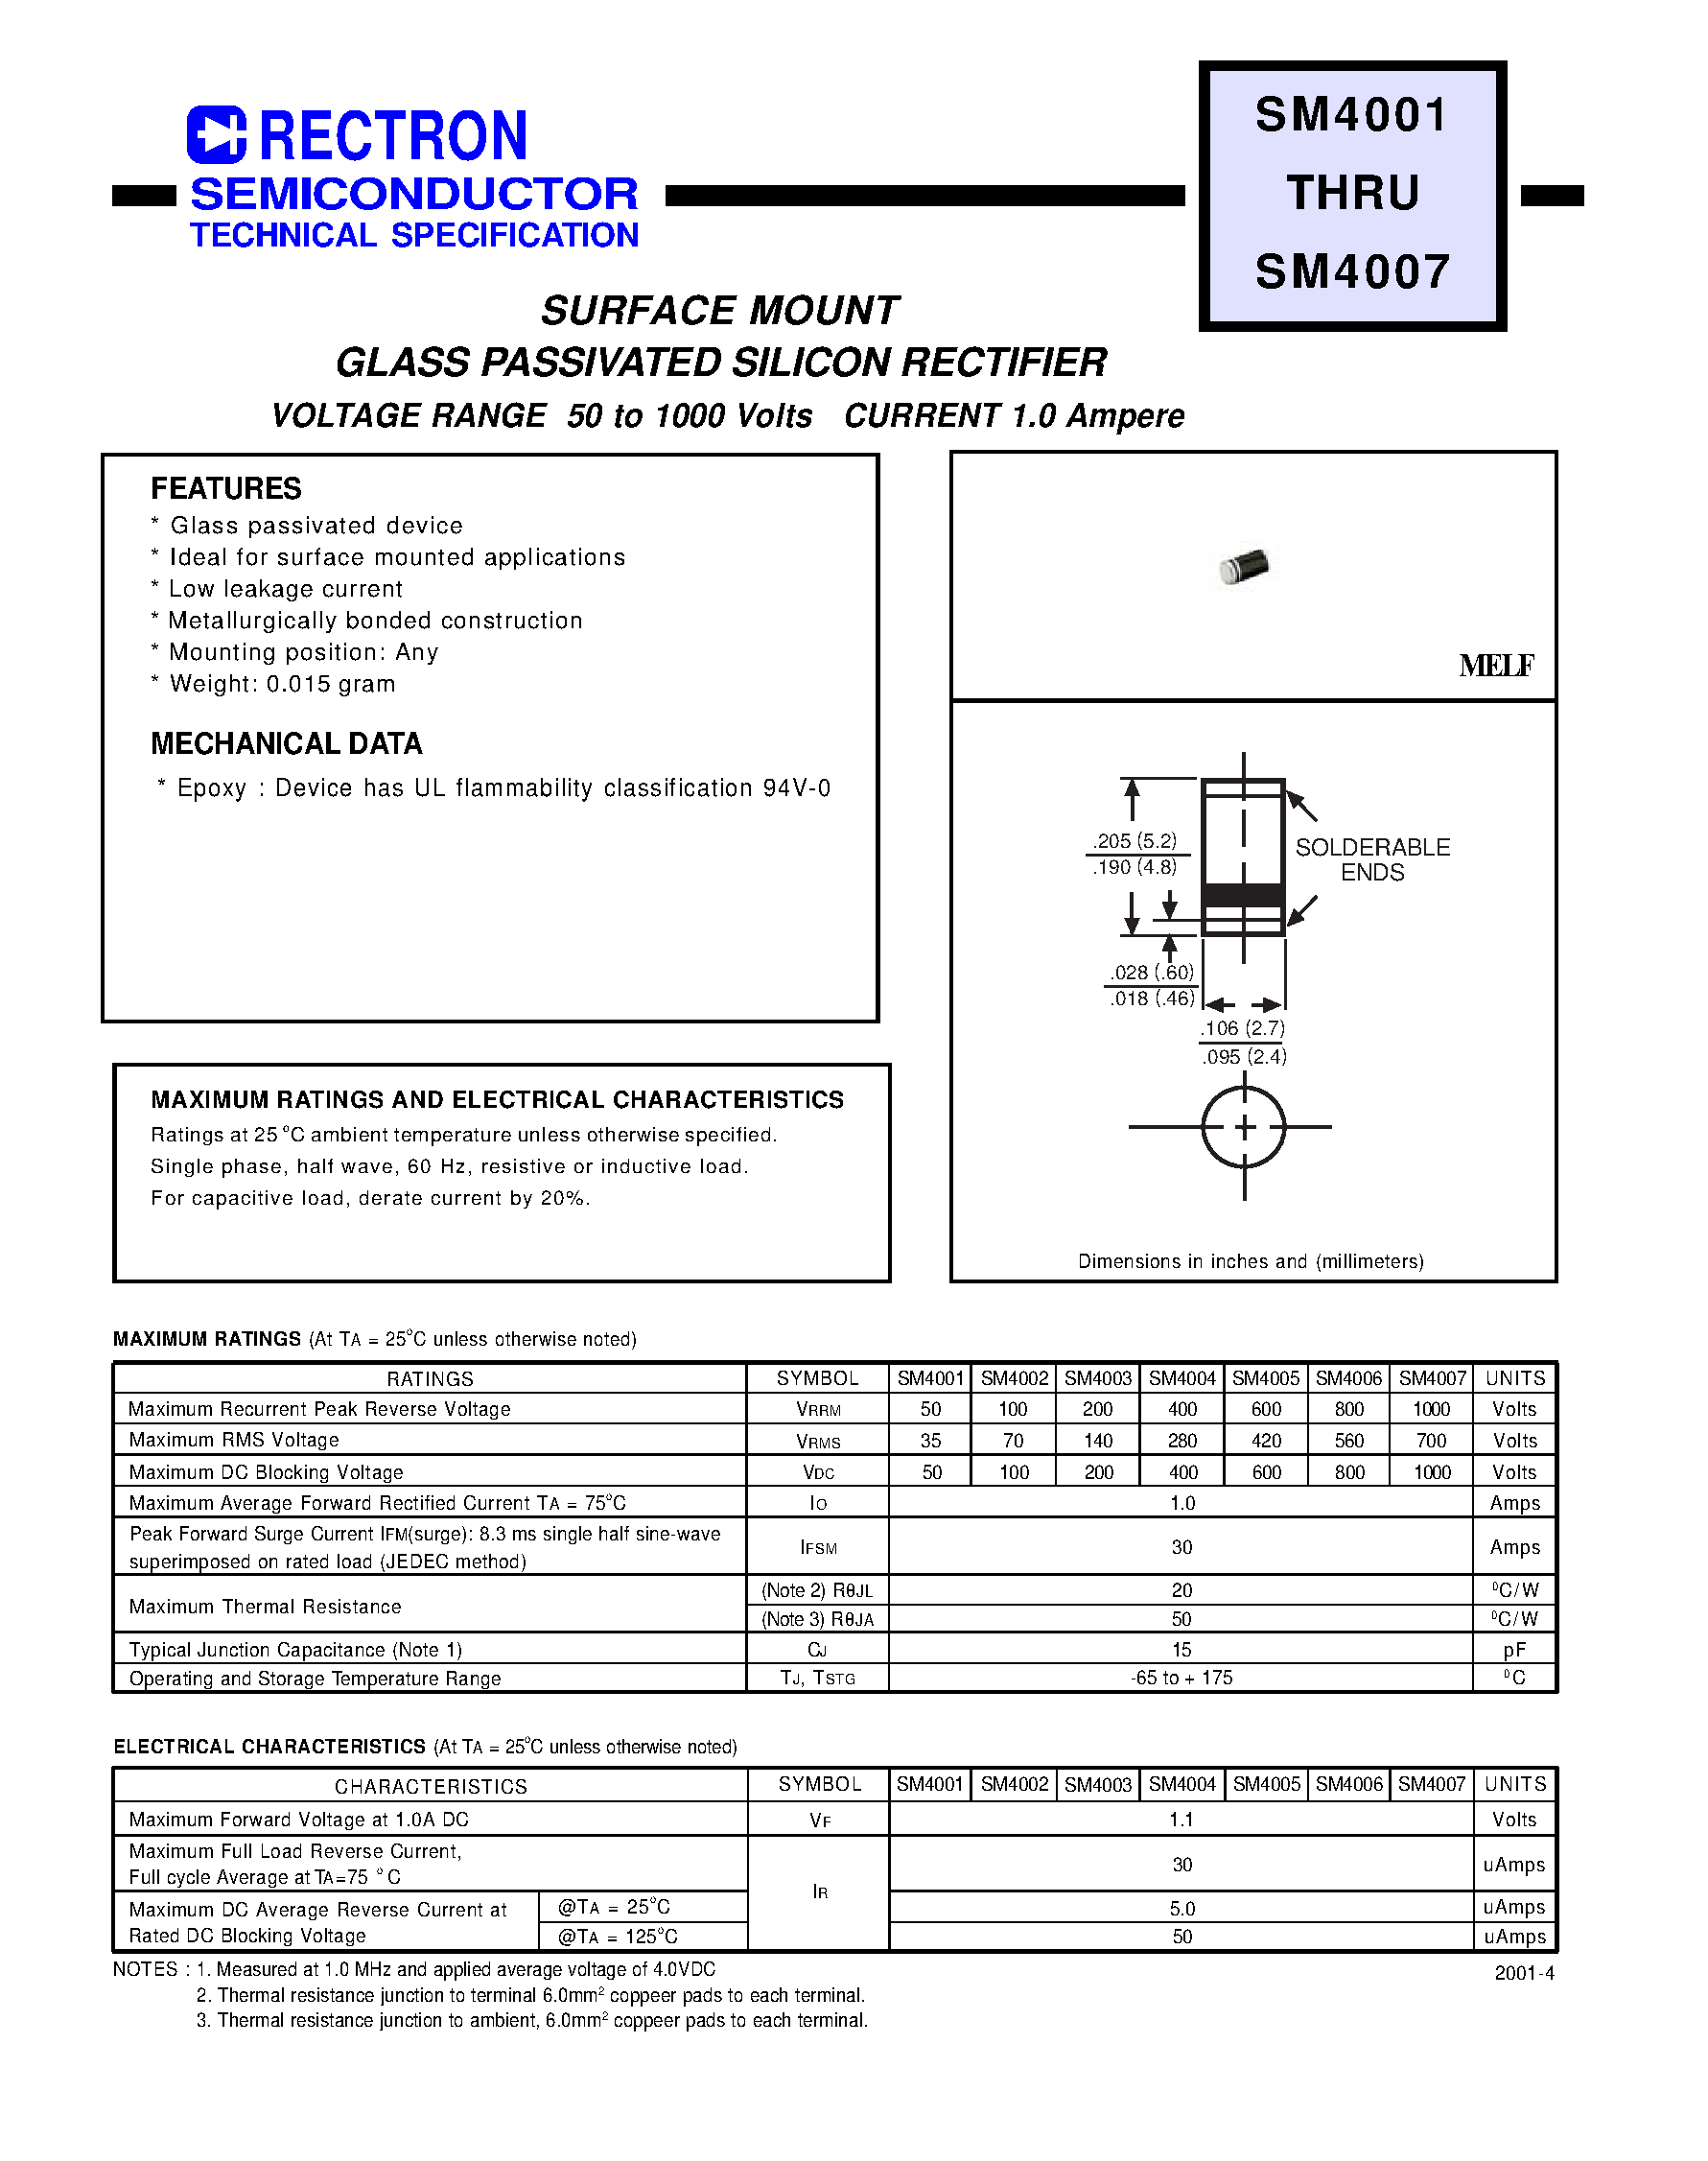 Даташит SM4001 - SURFACE MOUNT GLASS PASSIVATED SILICON RECTIFIER (VOLTAGE RANGE 50 to 1000 Volts CURRENT 1.0 Ampere) страница 1